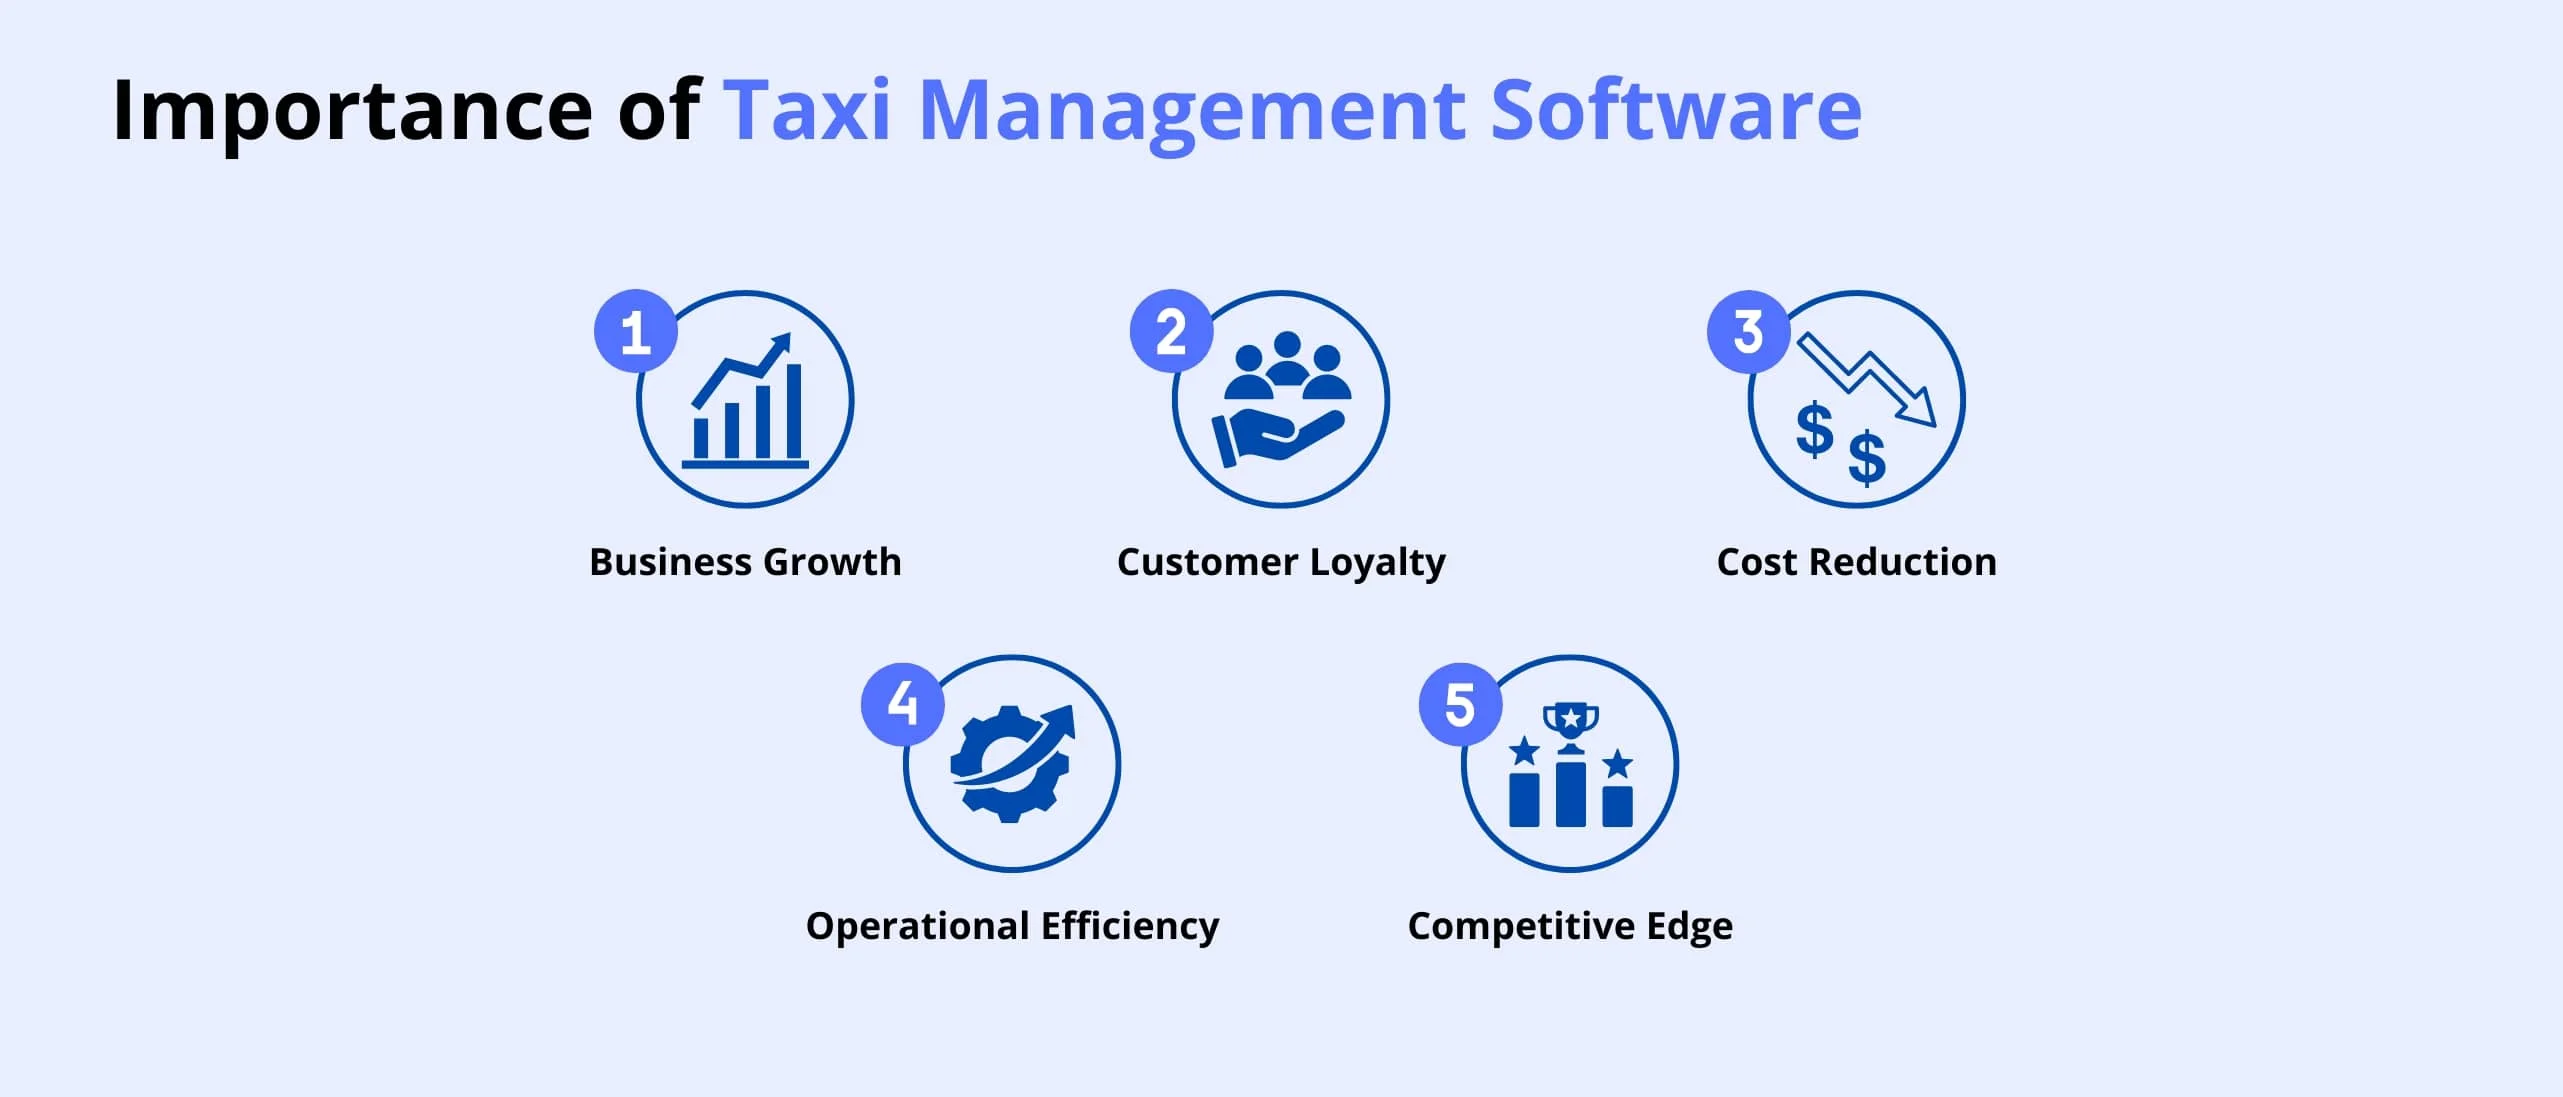 Taxi management software